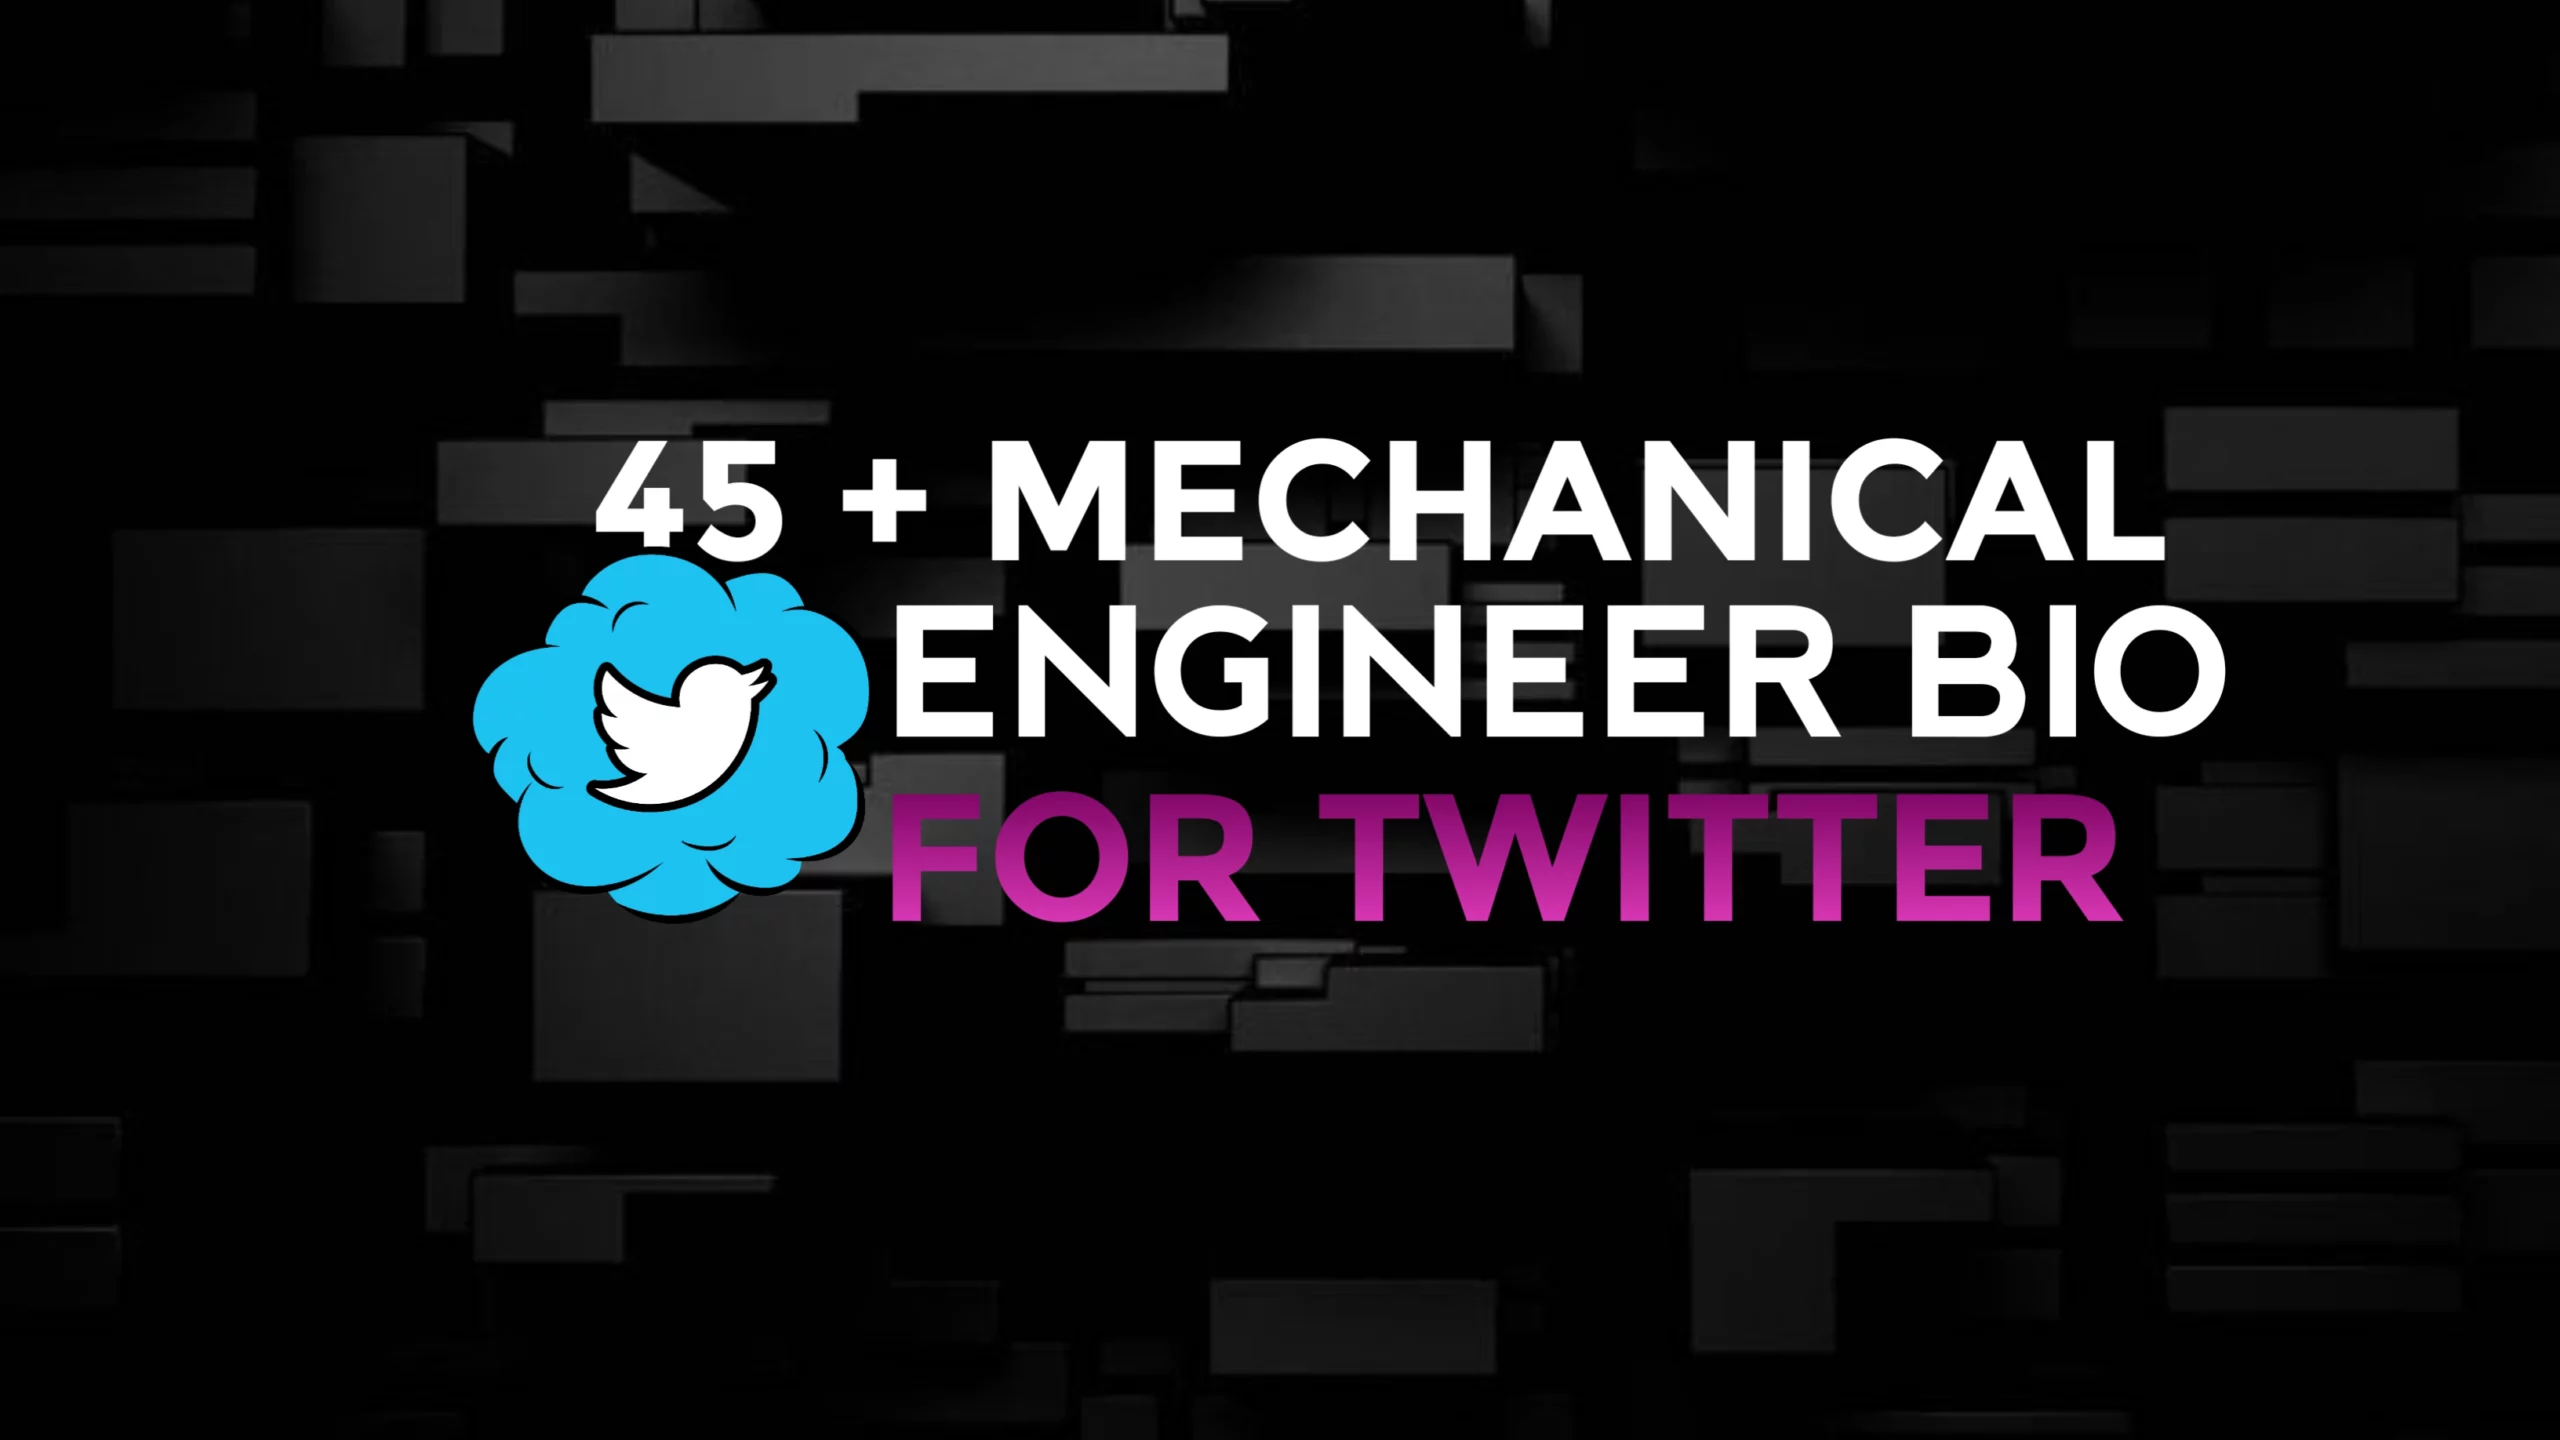 45+ Twitter Bio For Mechanical Engineer To Attract Followers